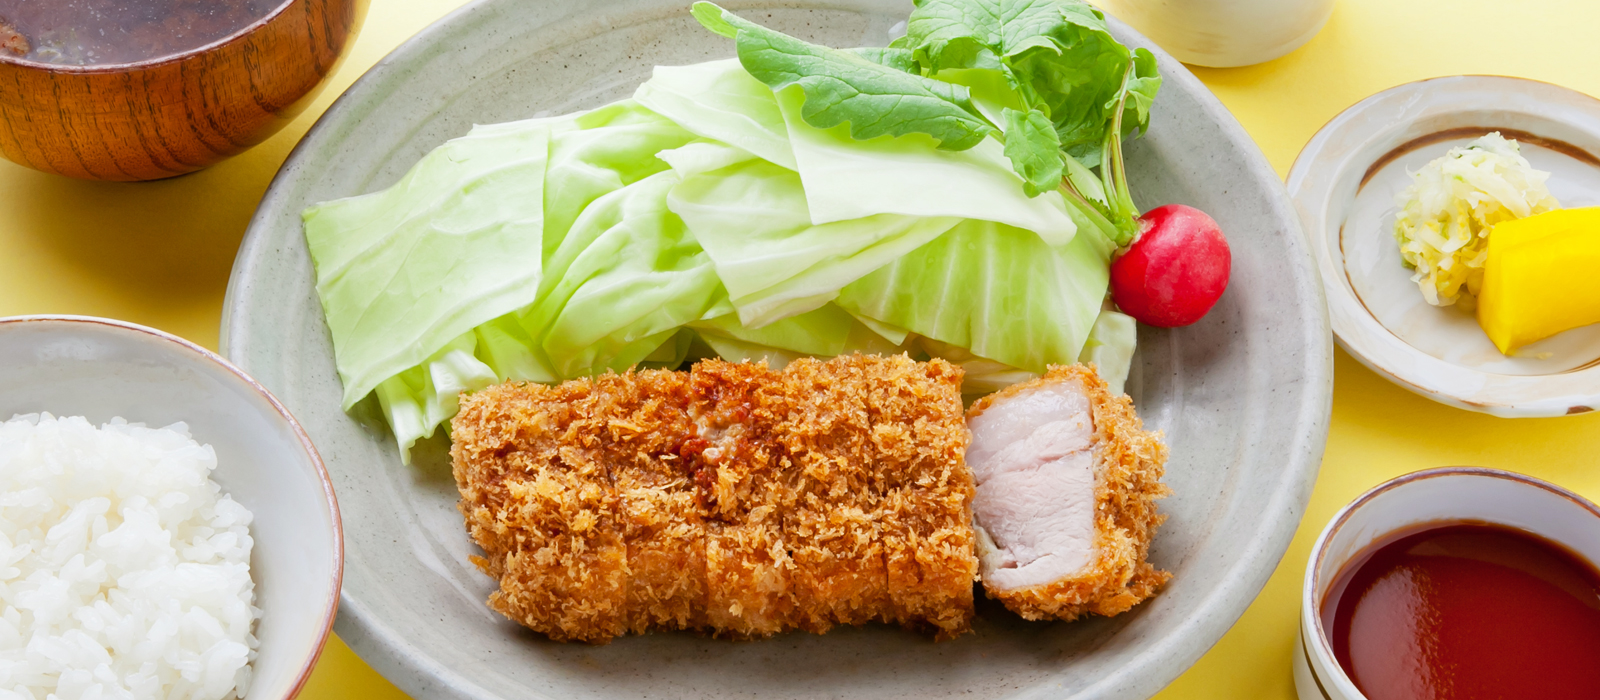 Enjoy our thick tonkatsu, full of meaty flavor that fills your mouth as you chew.